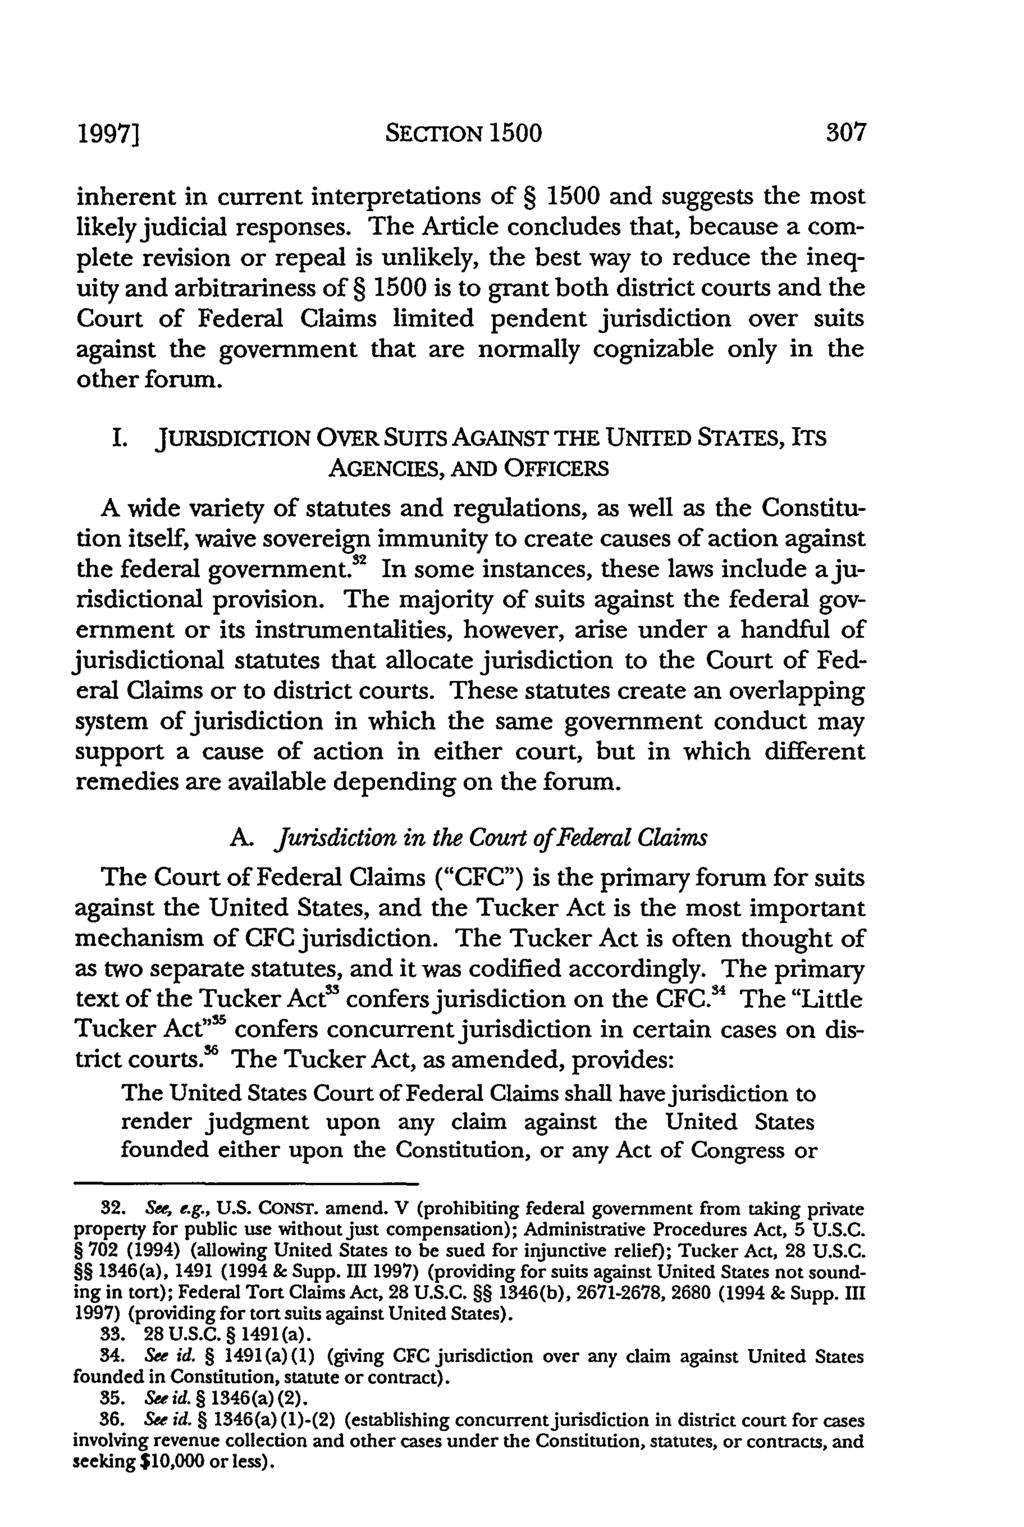 1997] SECTION 1500 inherent in current interpretations of 1500 and suggests the most likely judicial responses.